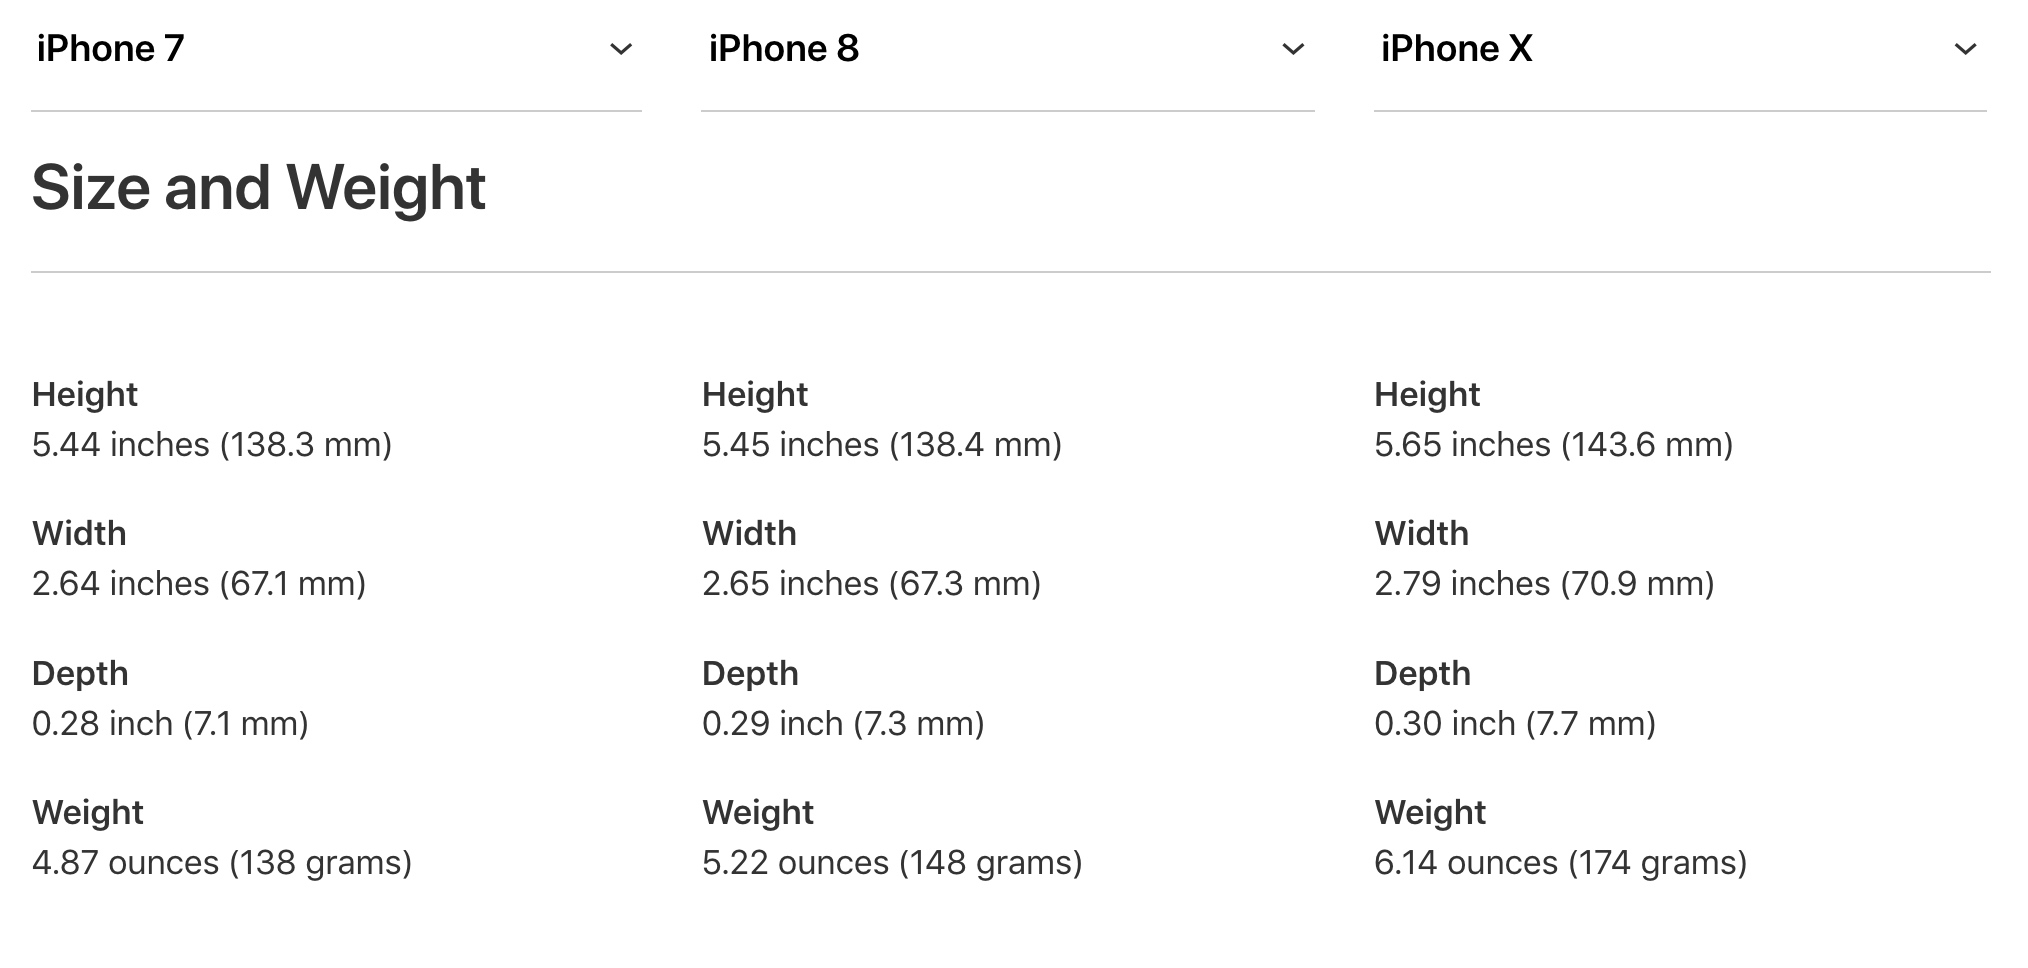 Weight, size, and battery life: iPhone X vs iPhone 8 vs iPhone 7